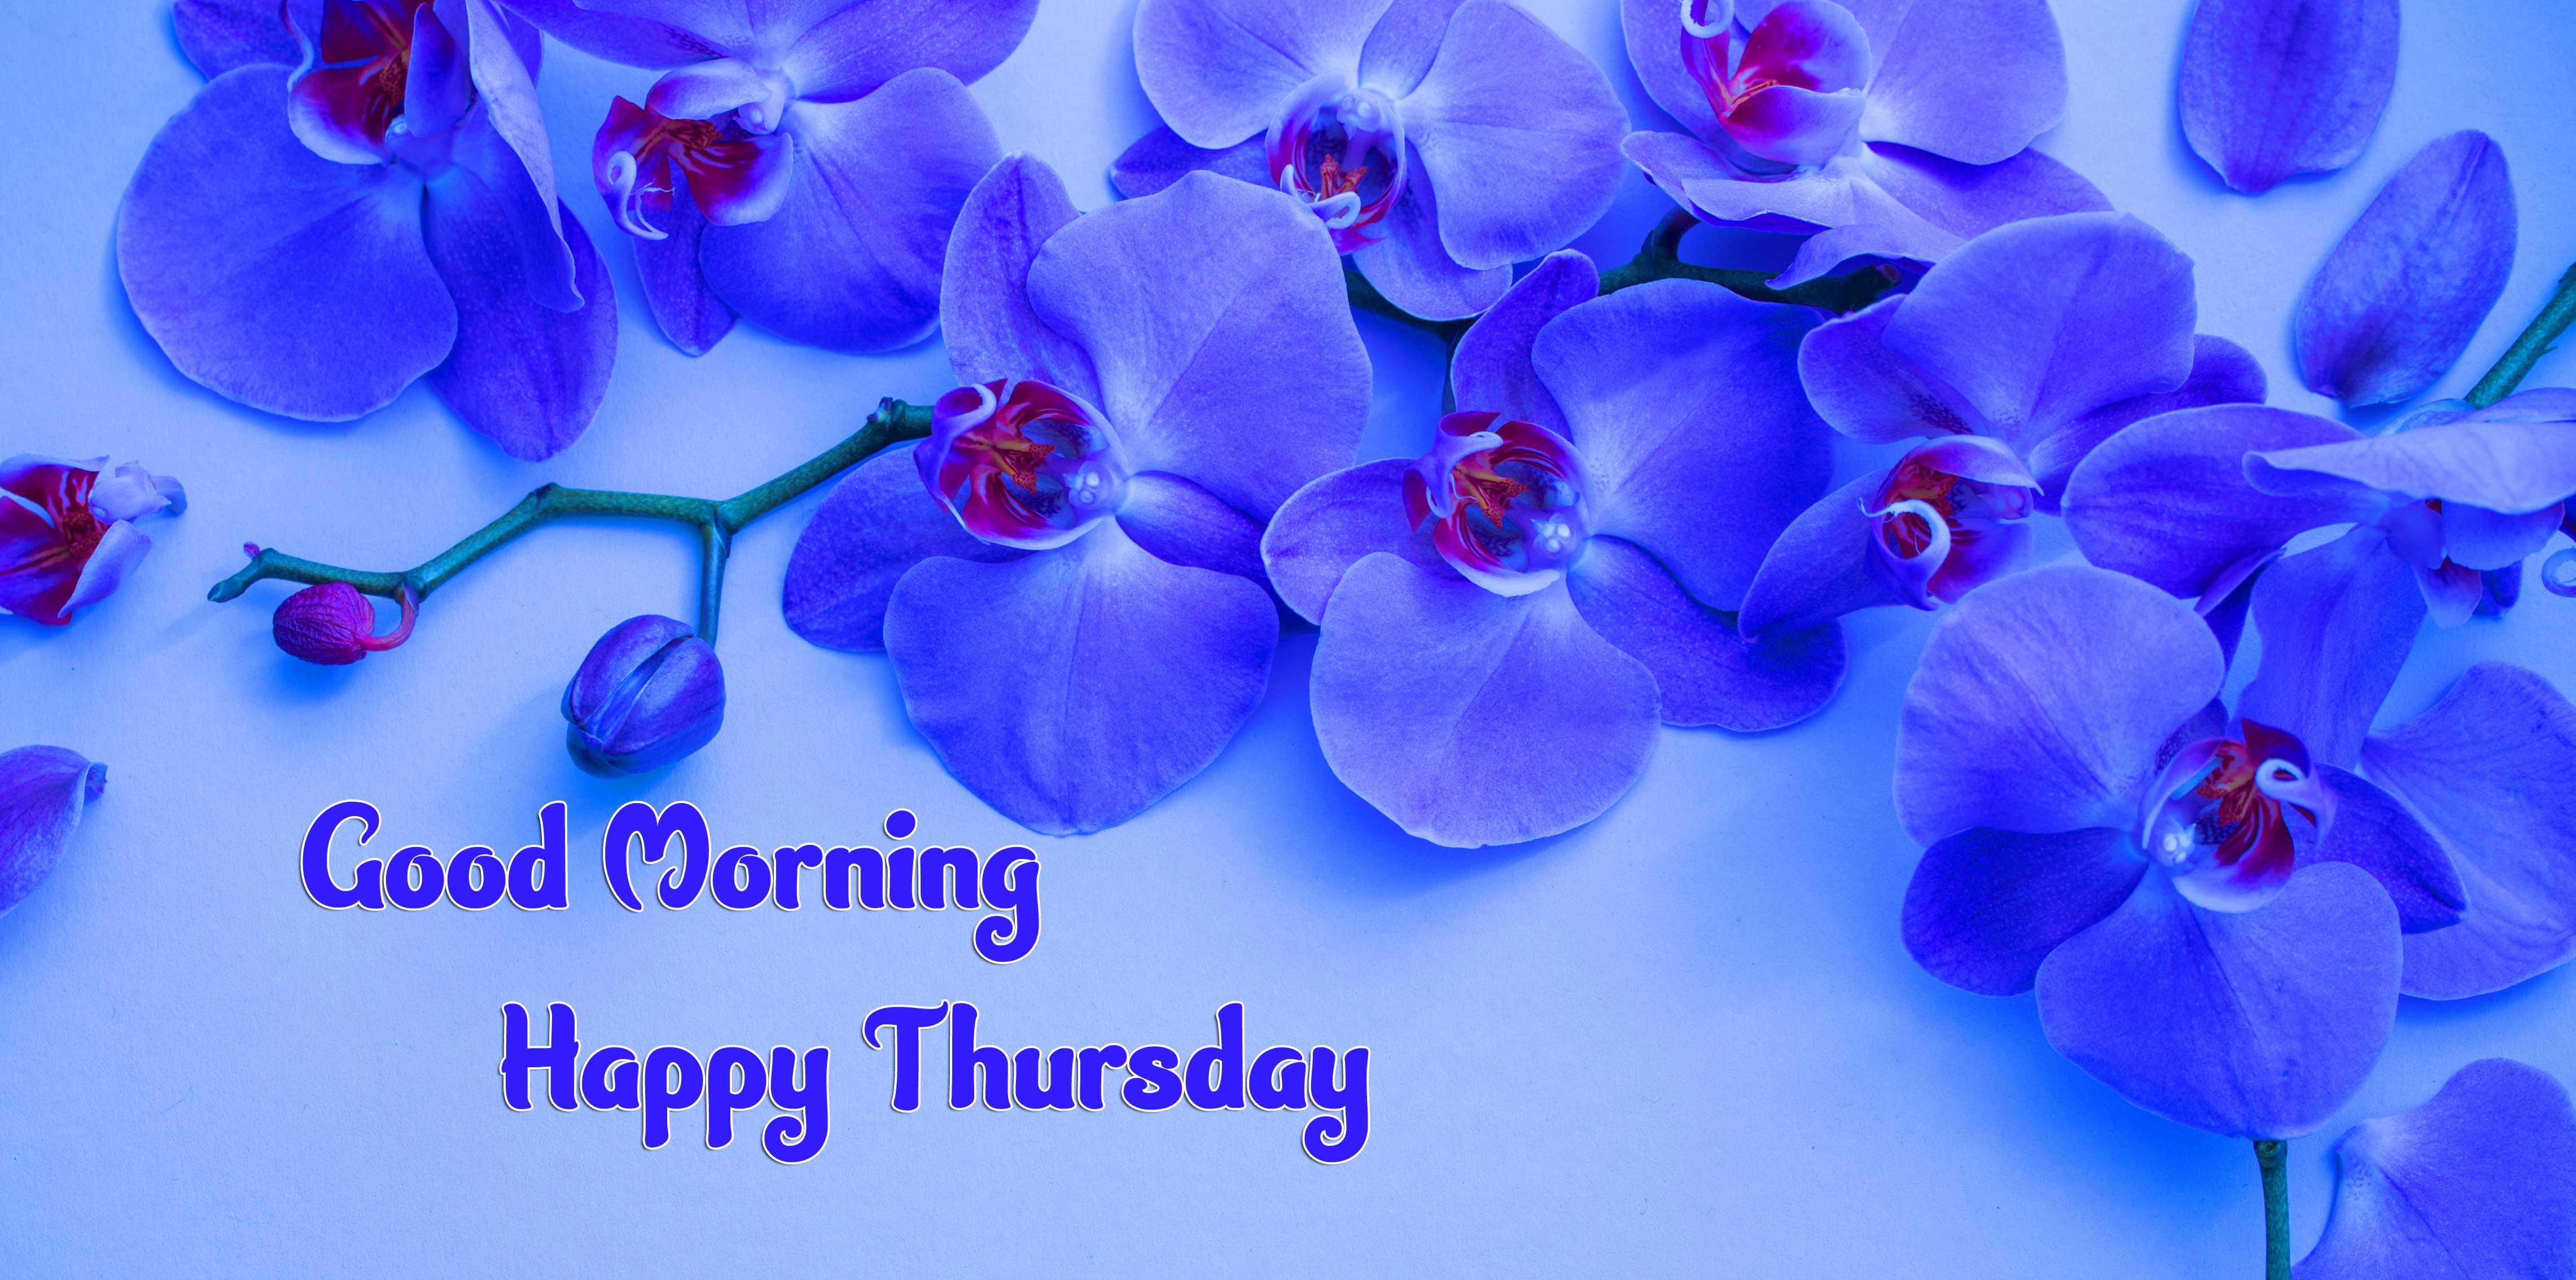 Thursday Good Morning Images Pics Free Download 